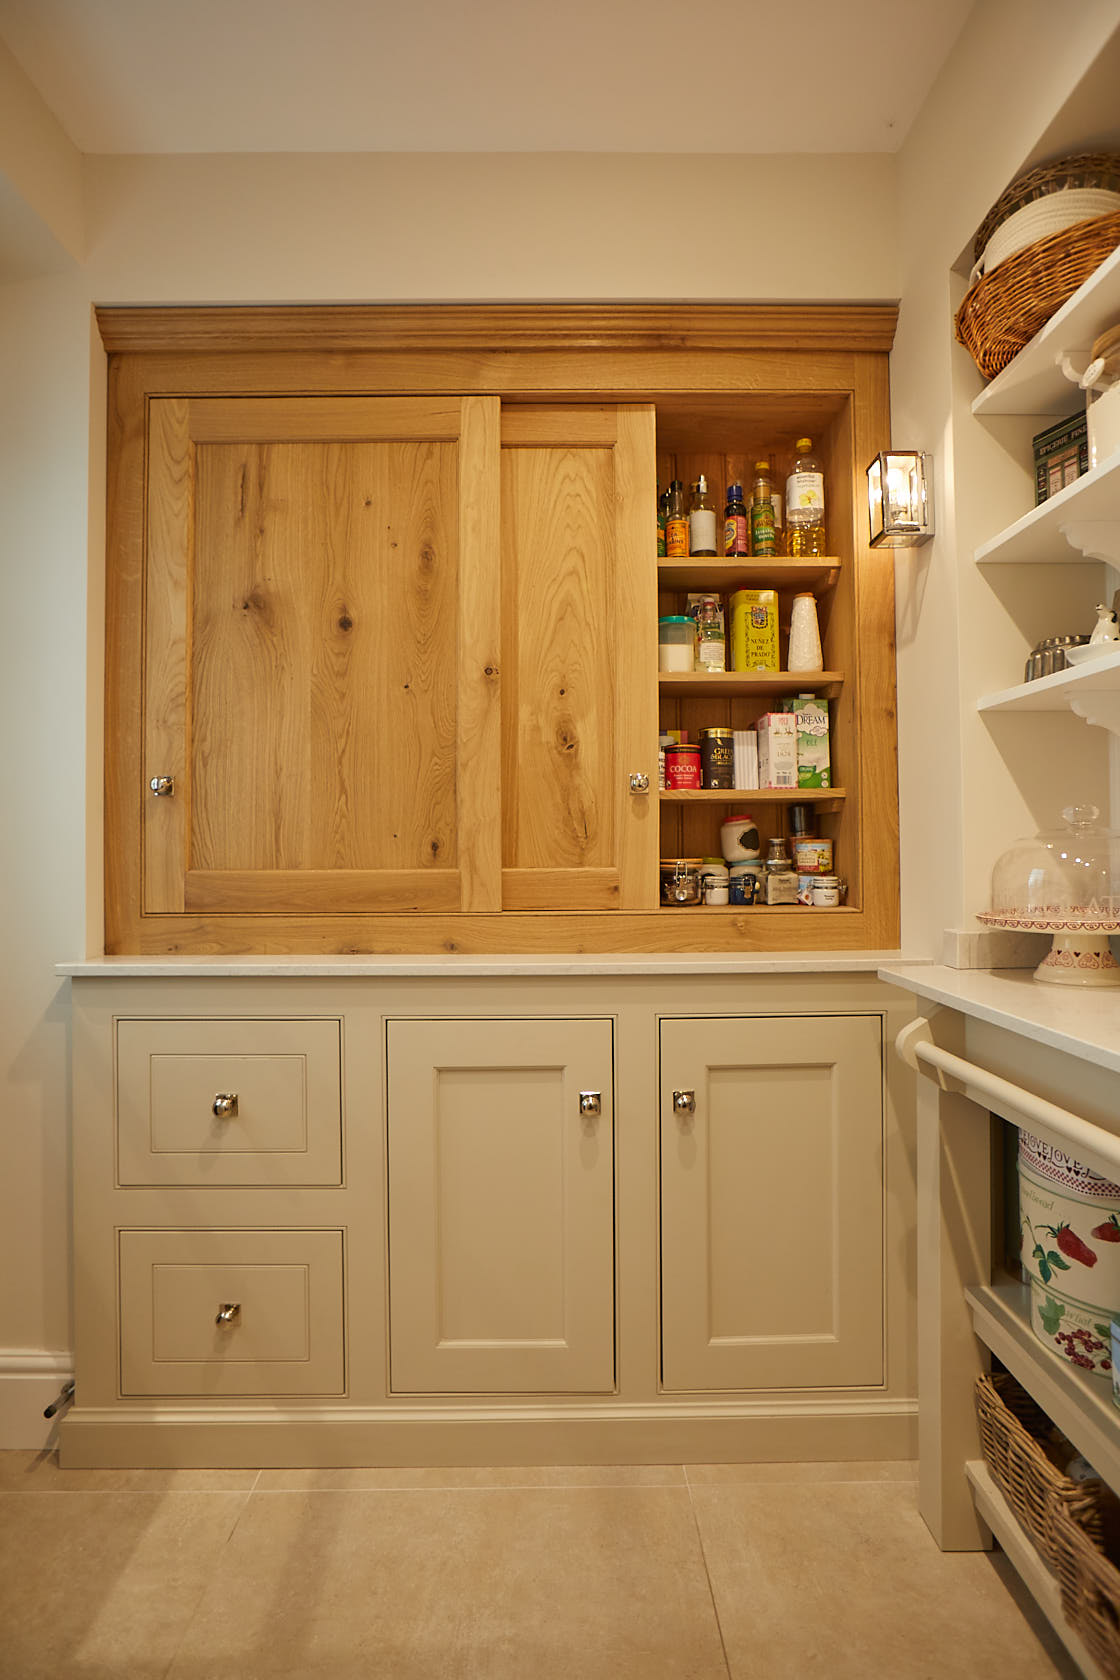 Sliding oak shaker doors in pantry with painted cream base cabinets